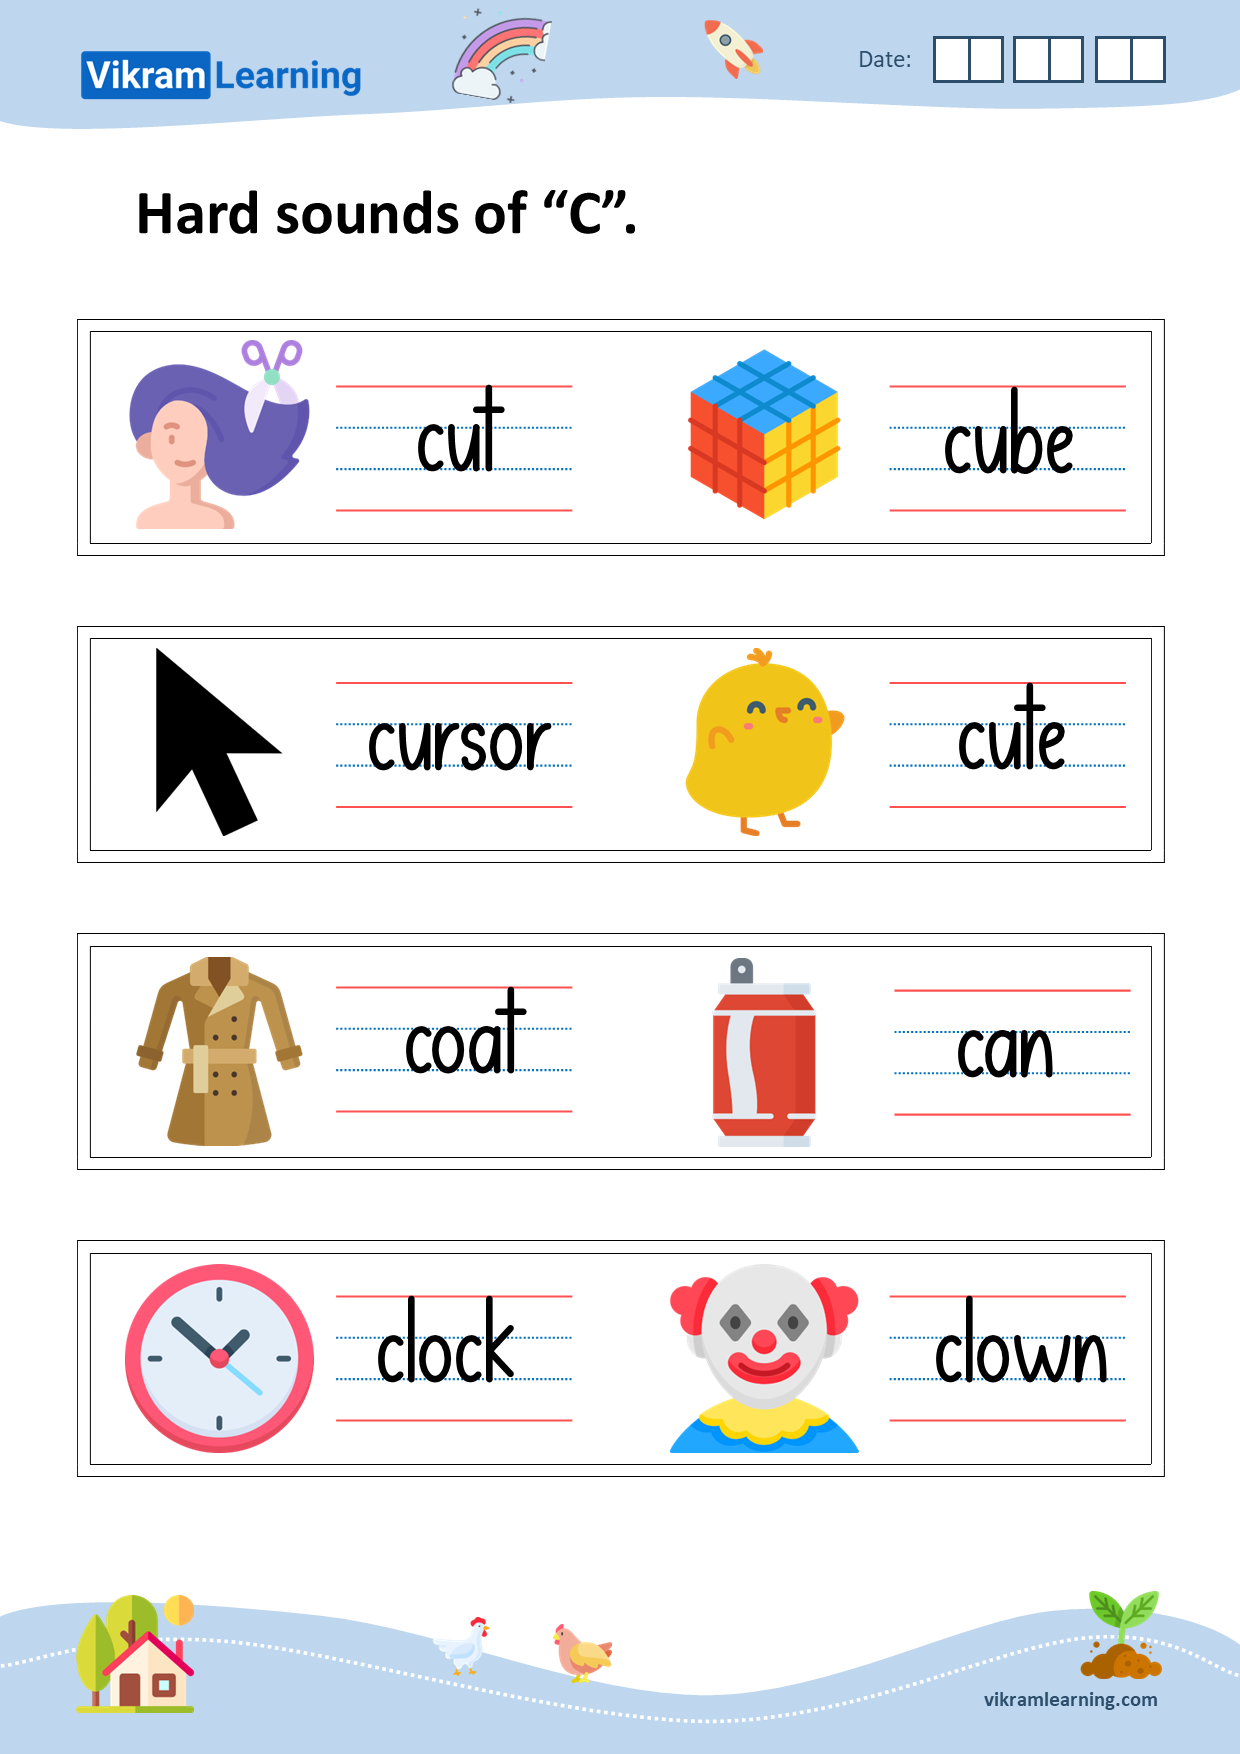 Download hard and soft sounds of c worksheets